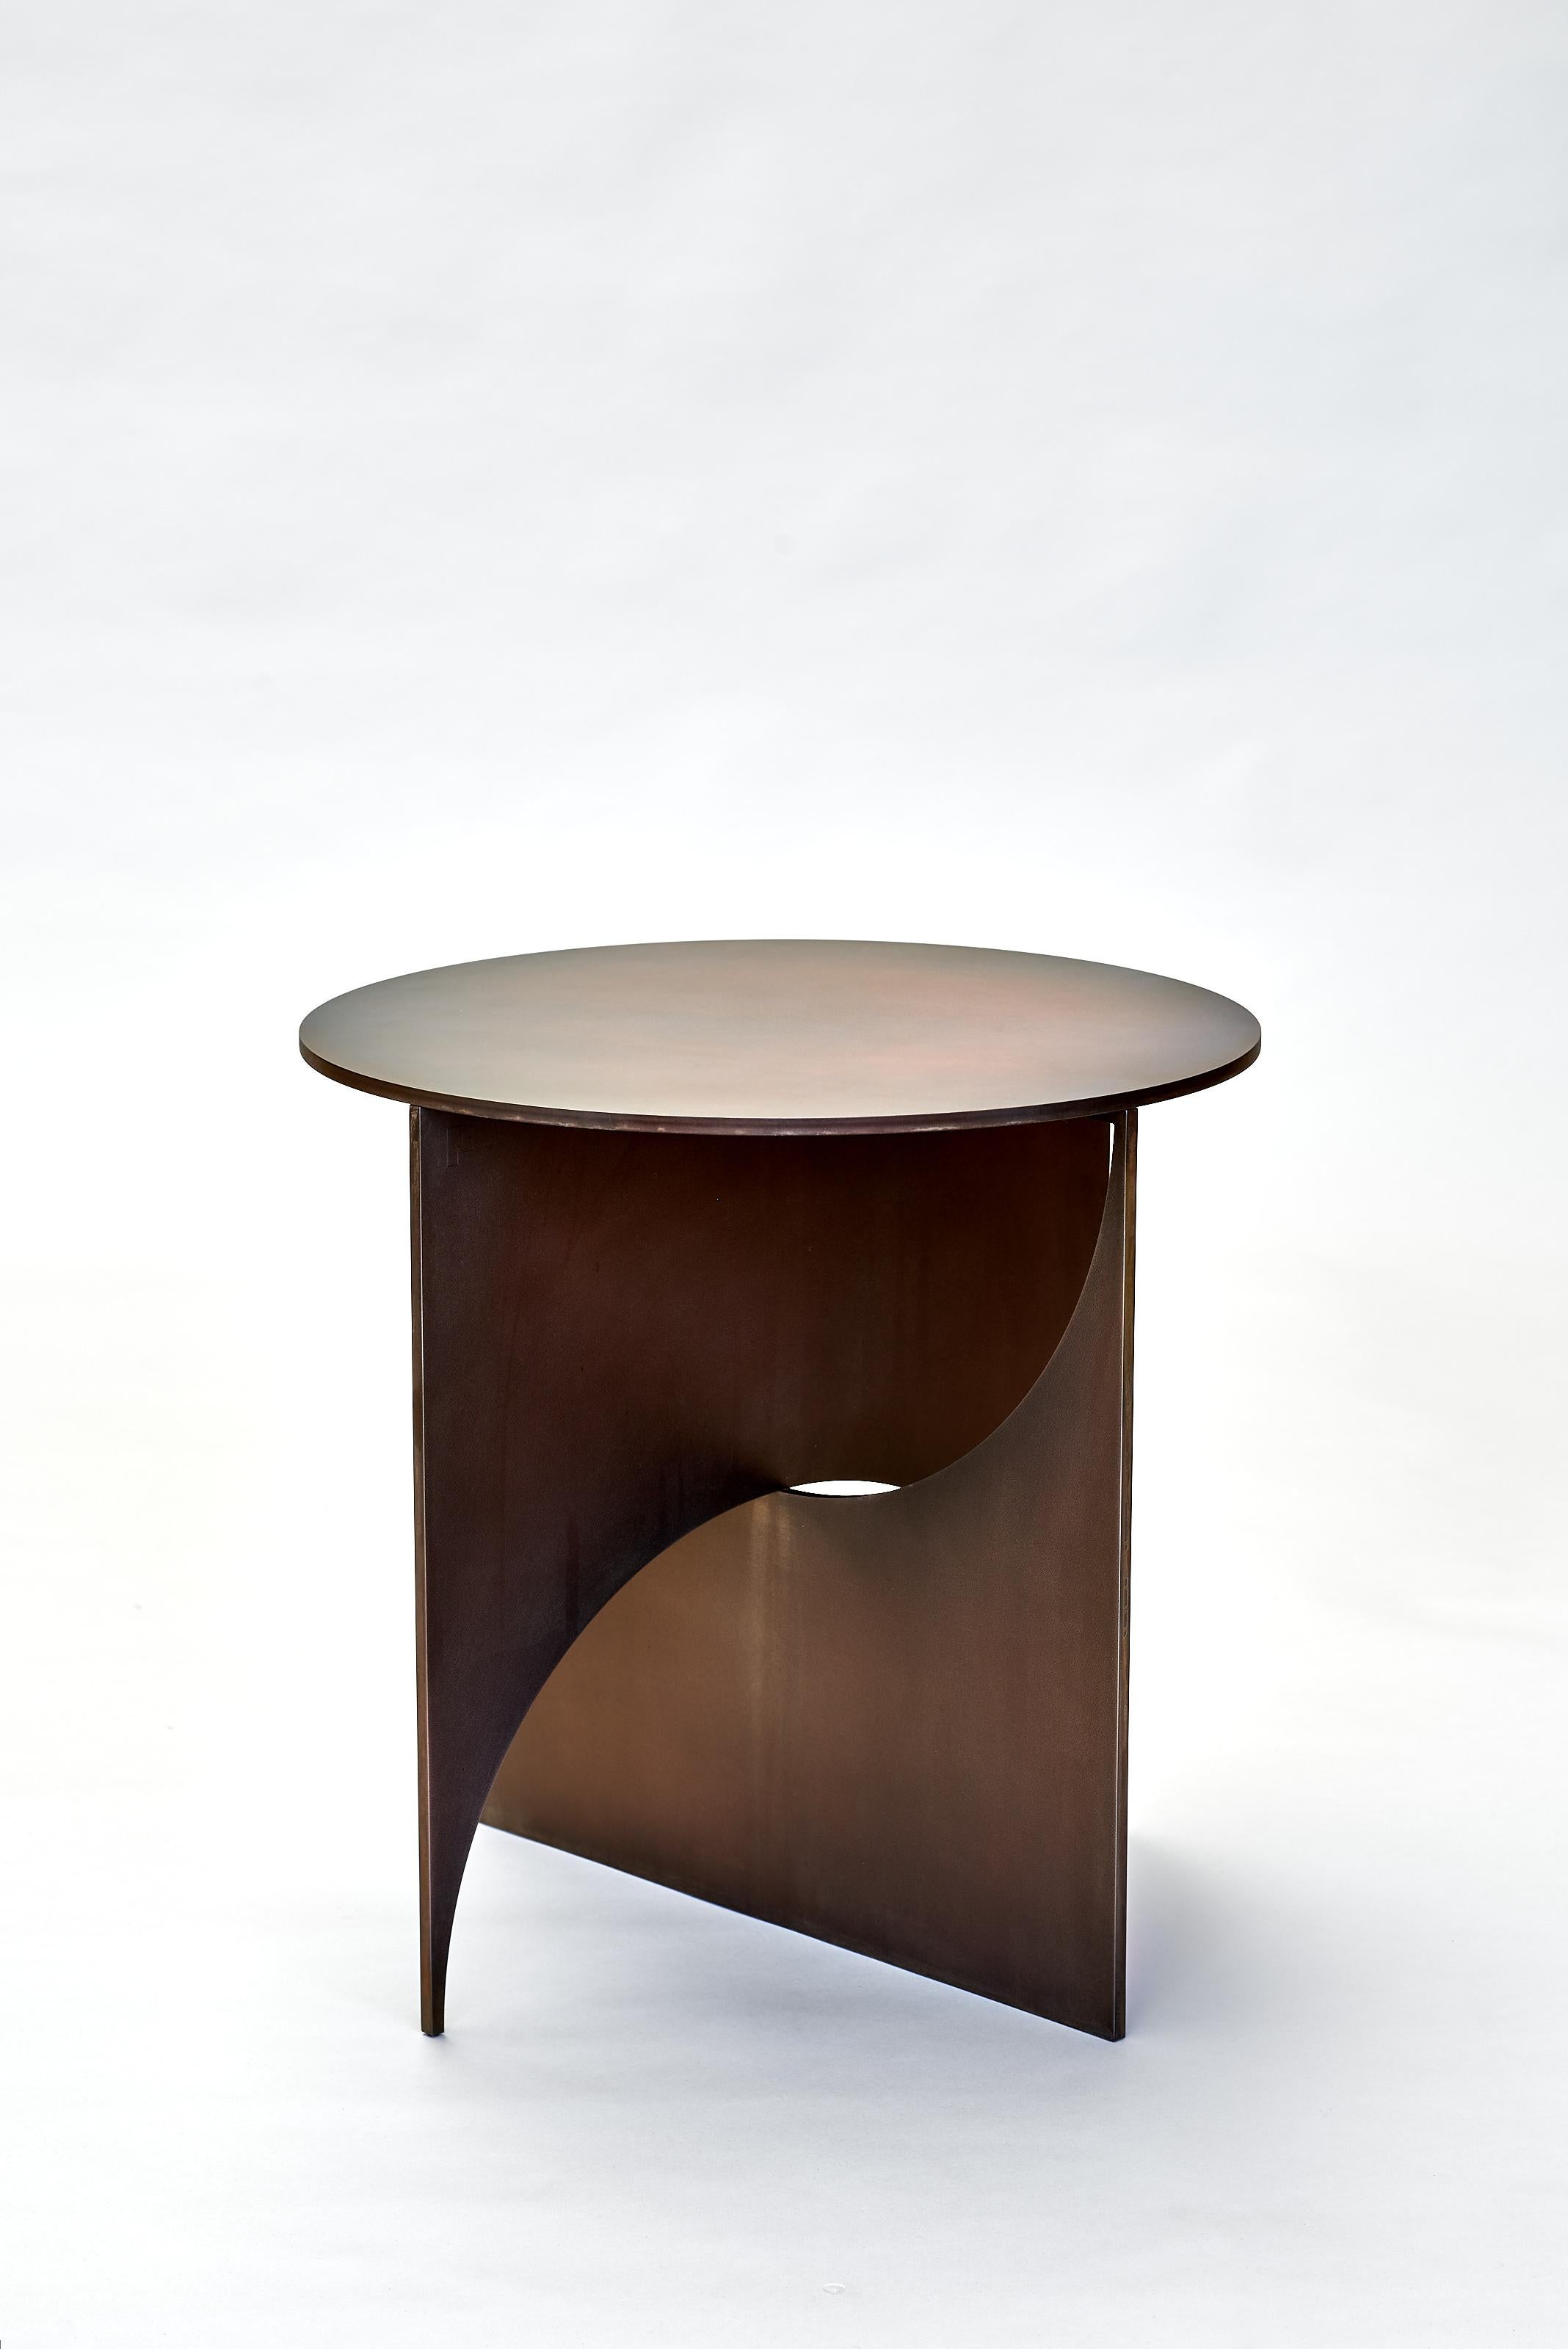 Contemporary 'Iris' Steel Table with Black Copper patina, by Frank Penders For Sale